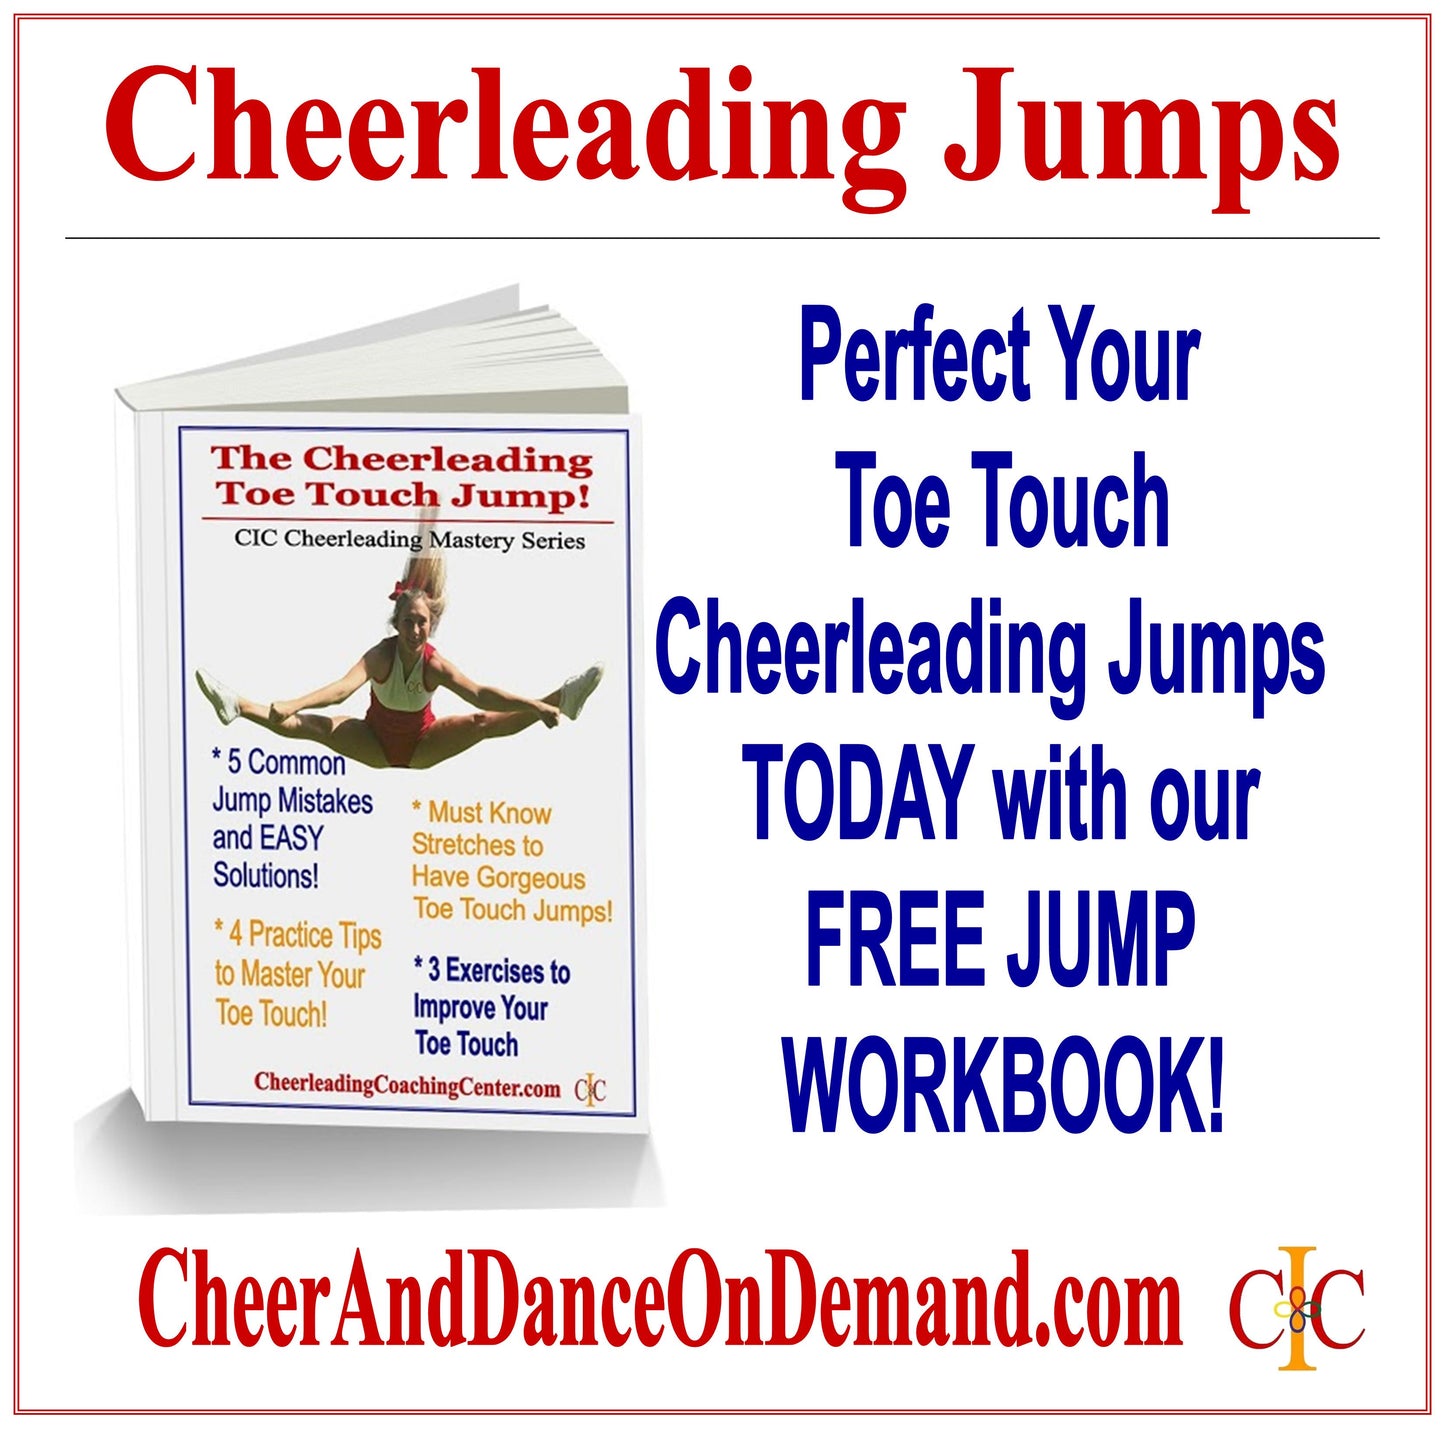 How to Get and Amazing Cheerleading Toe Touch Jump - FREE Guide Download